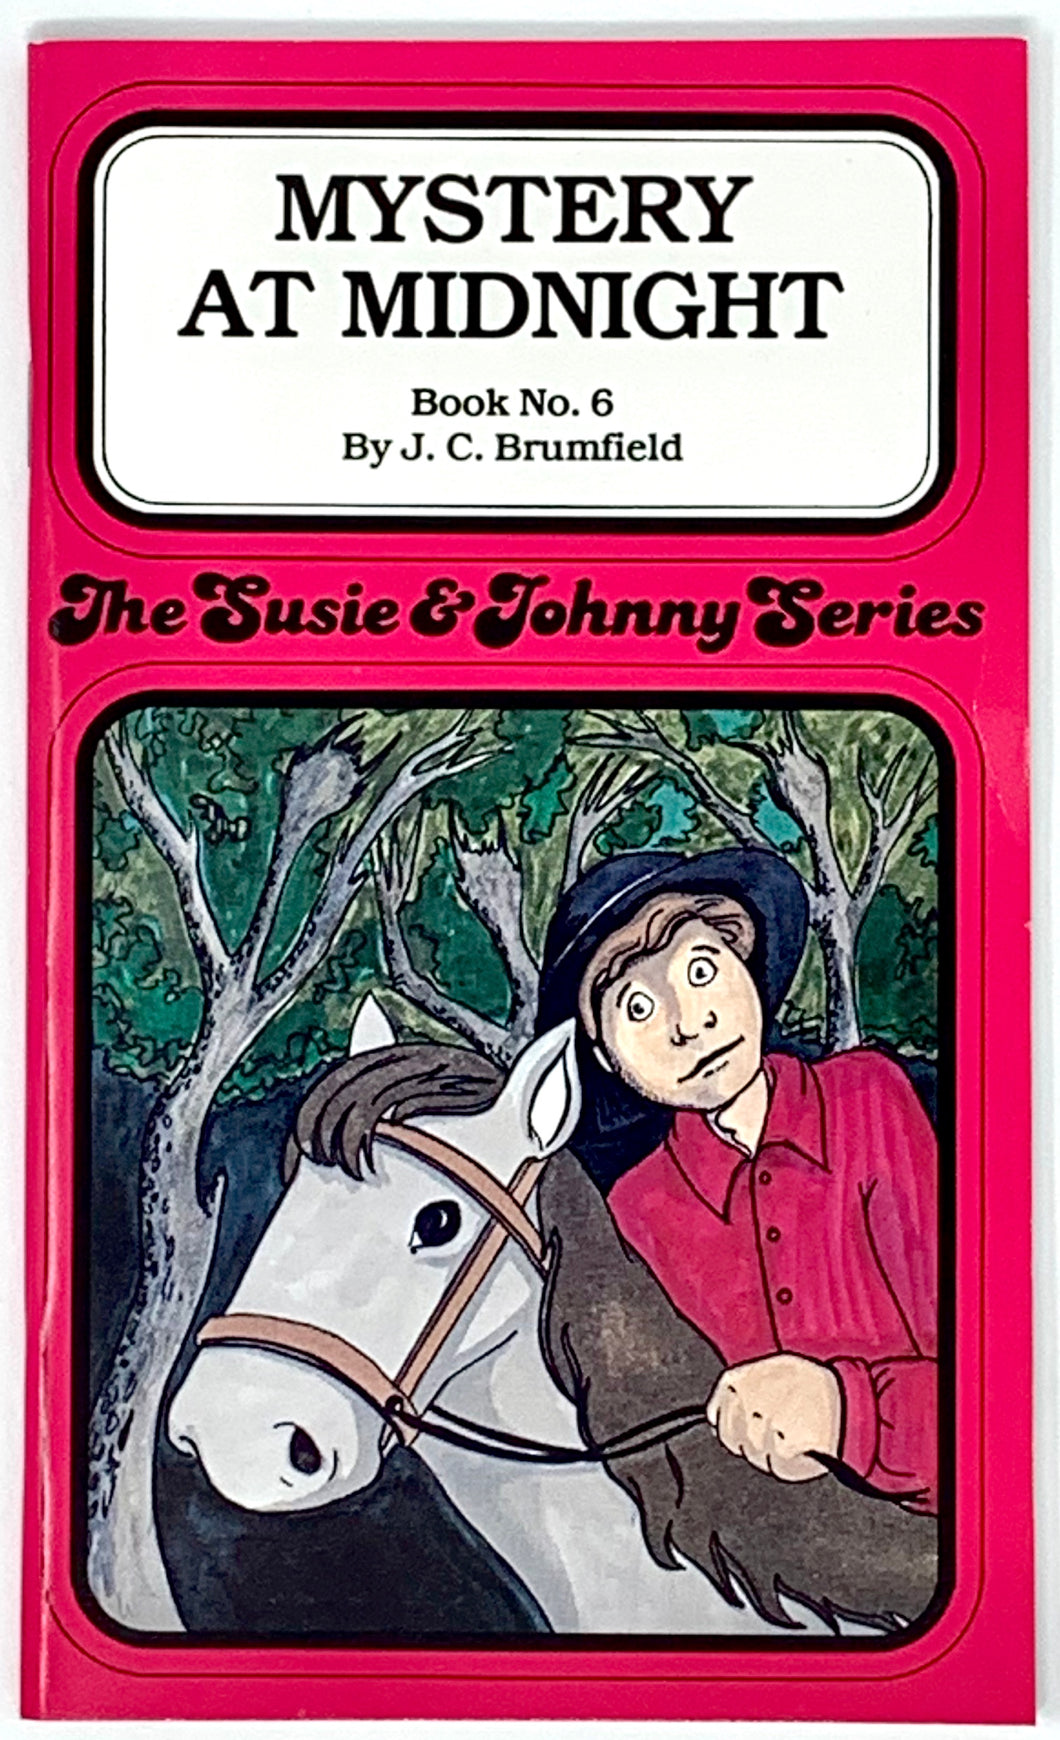 THE SUSIE & JOHNNY SERIES BOOK #6 